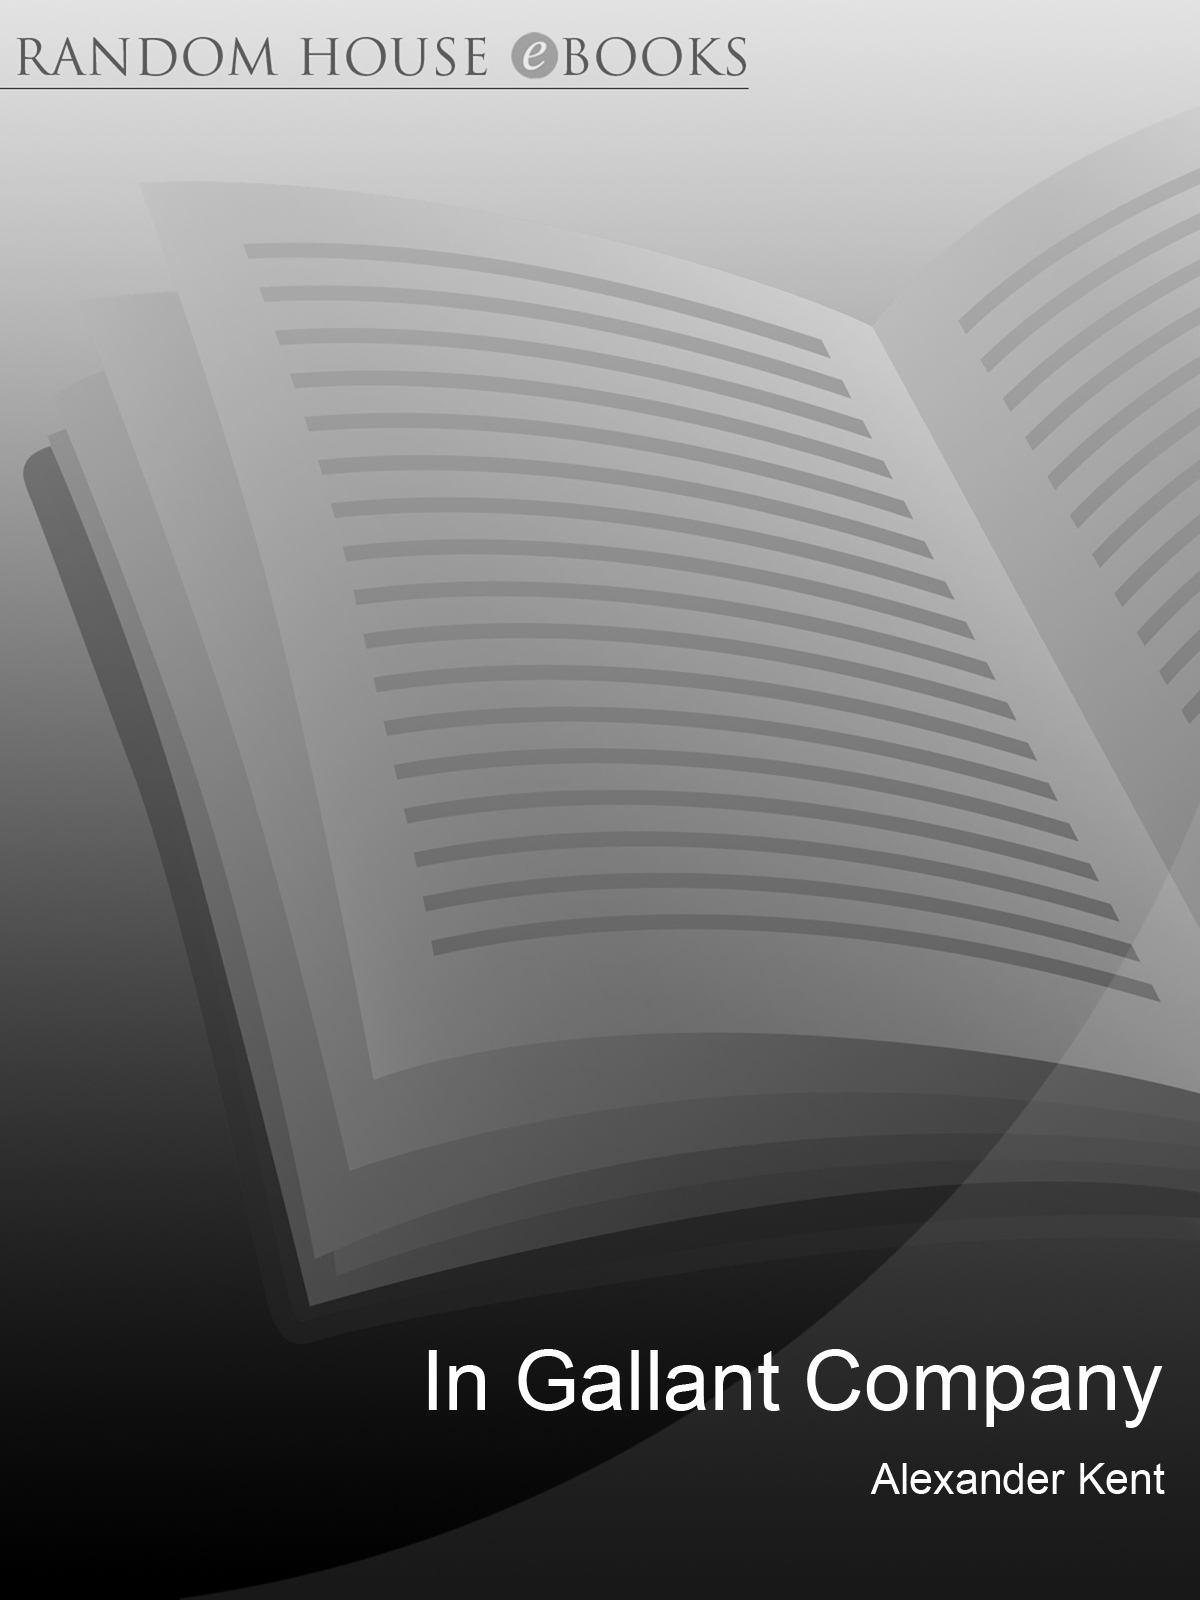 In Gallant Company (2012) by Alexander Kent